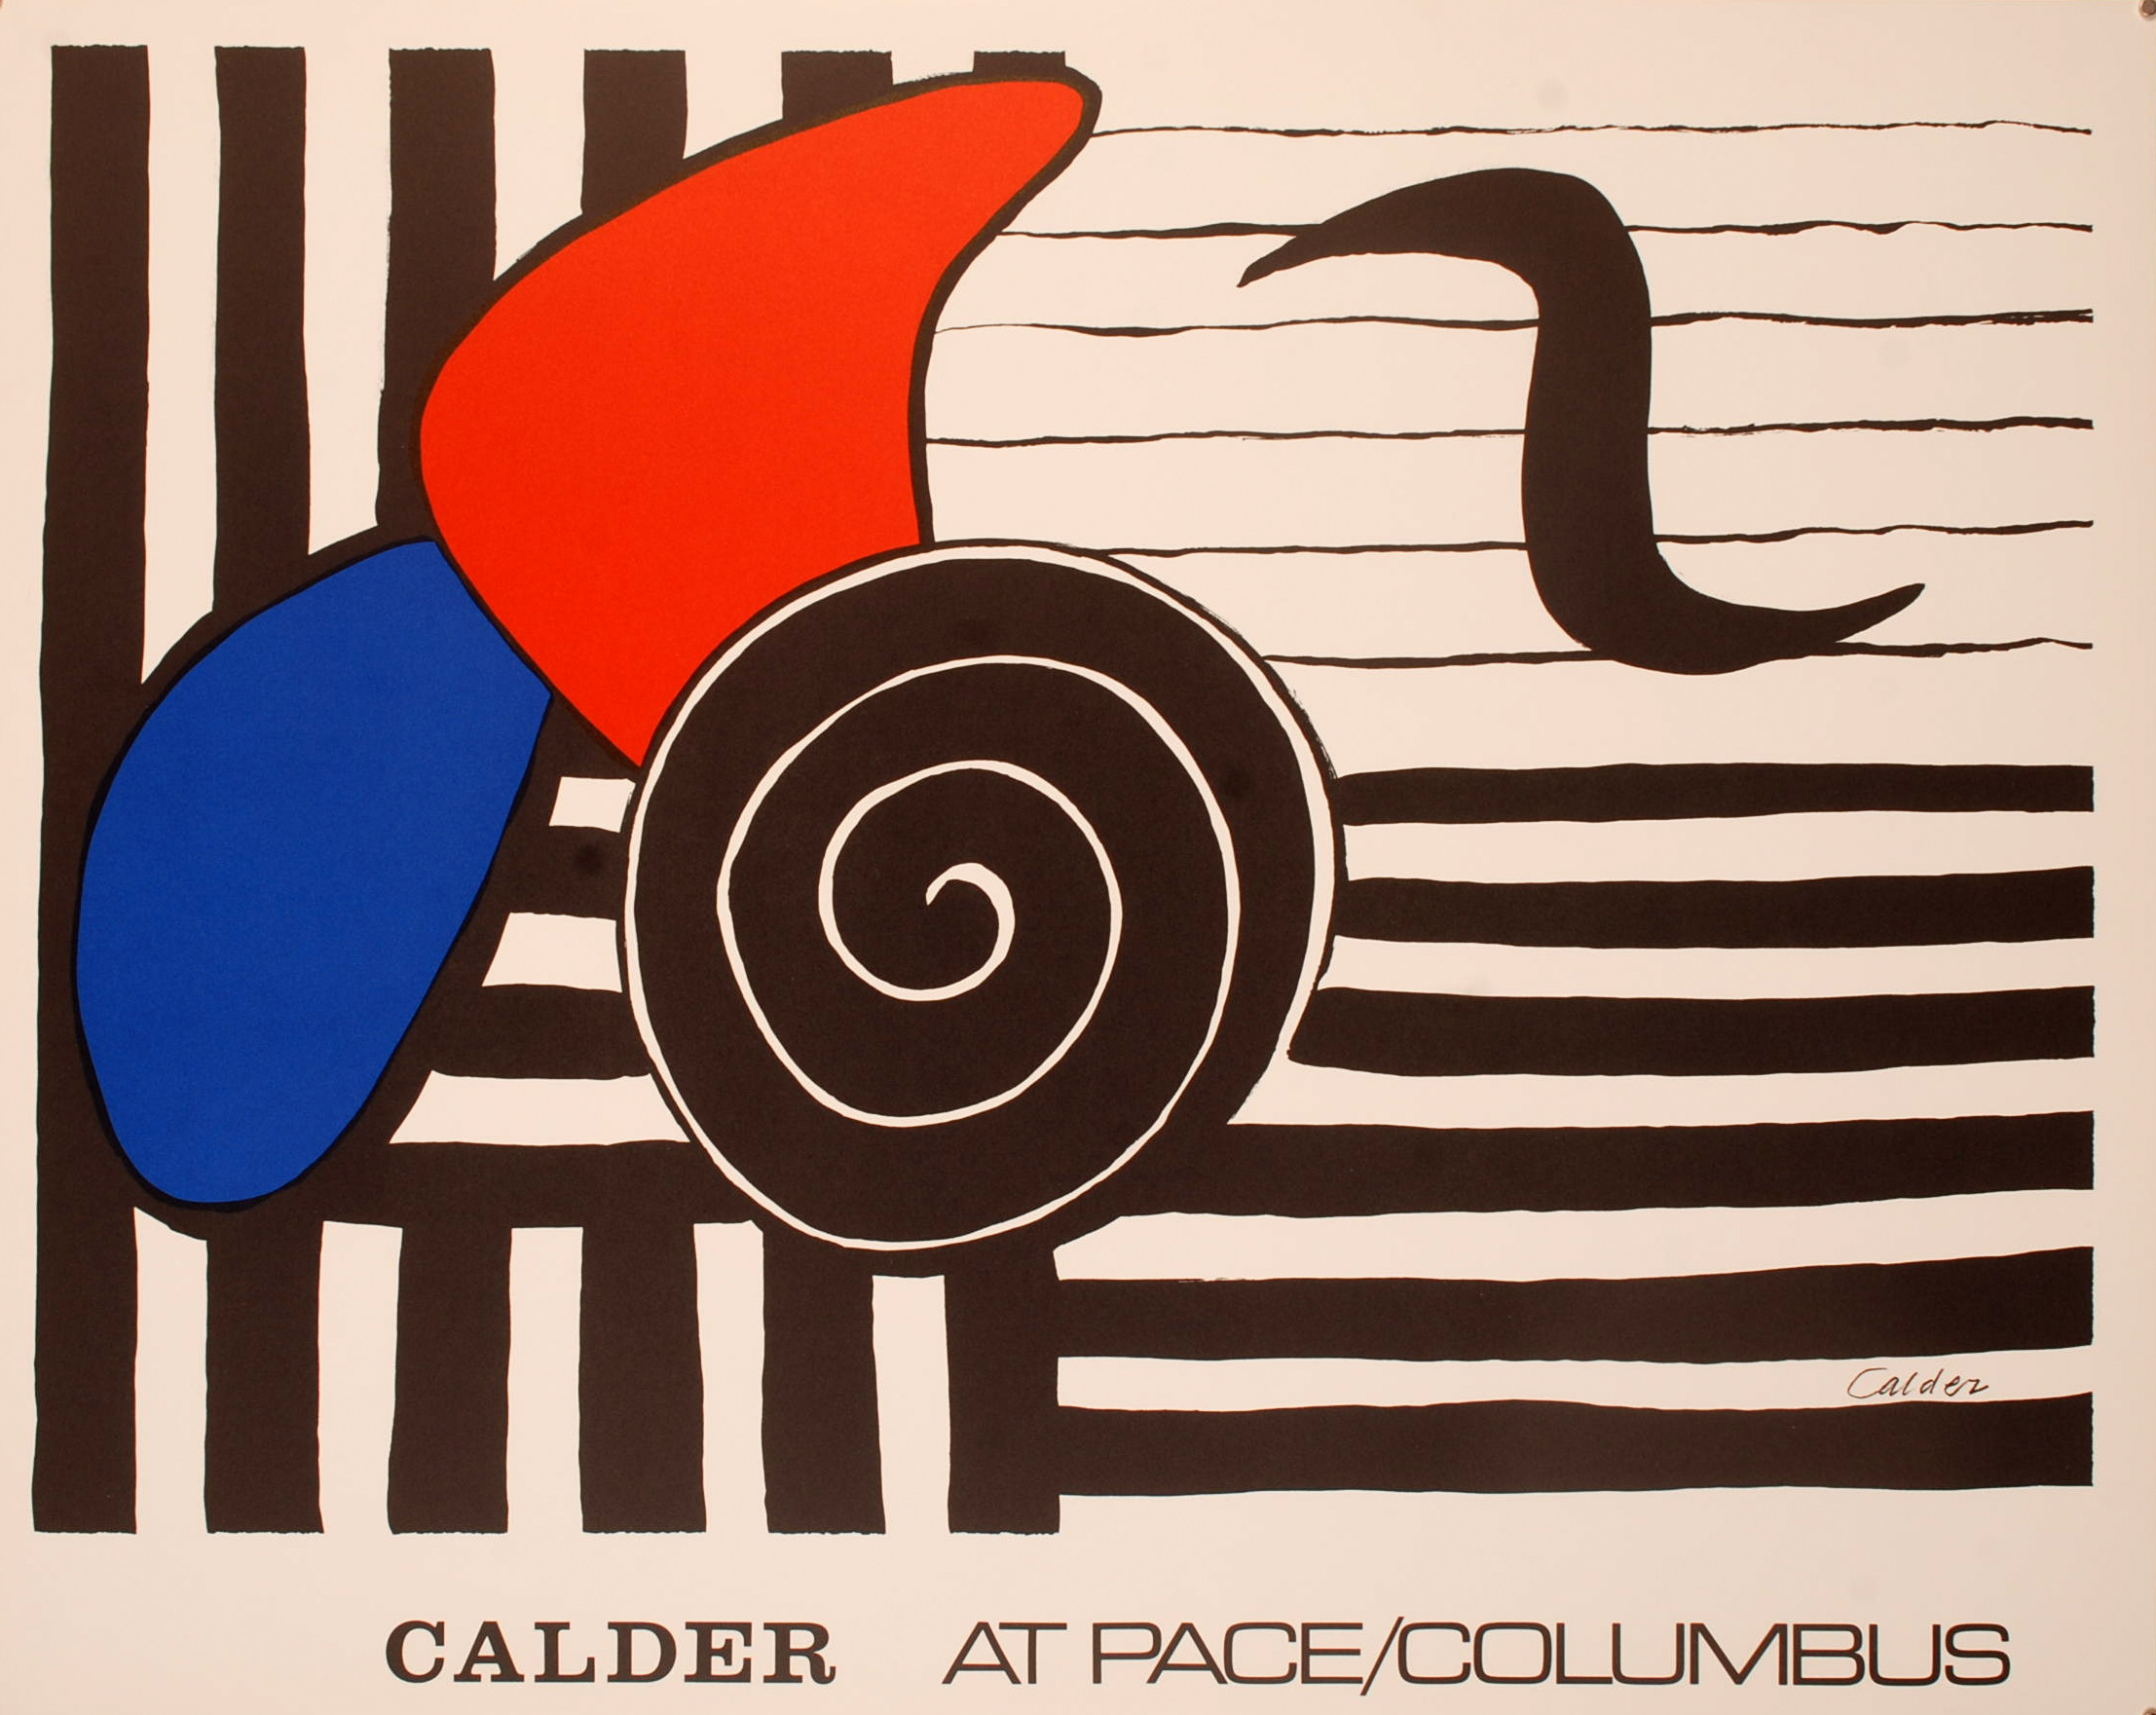 ALEXANDER CALDER
Titled - Helisse
Lithograph 
Signed in the print
58.5 x 73.